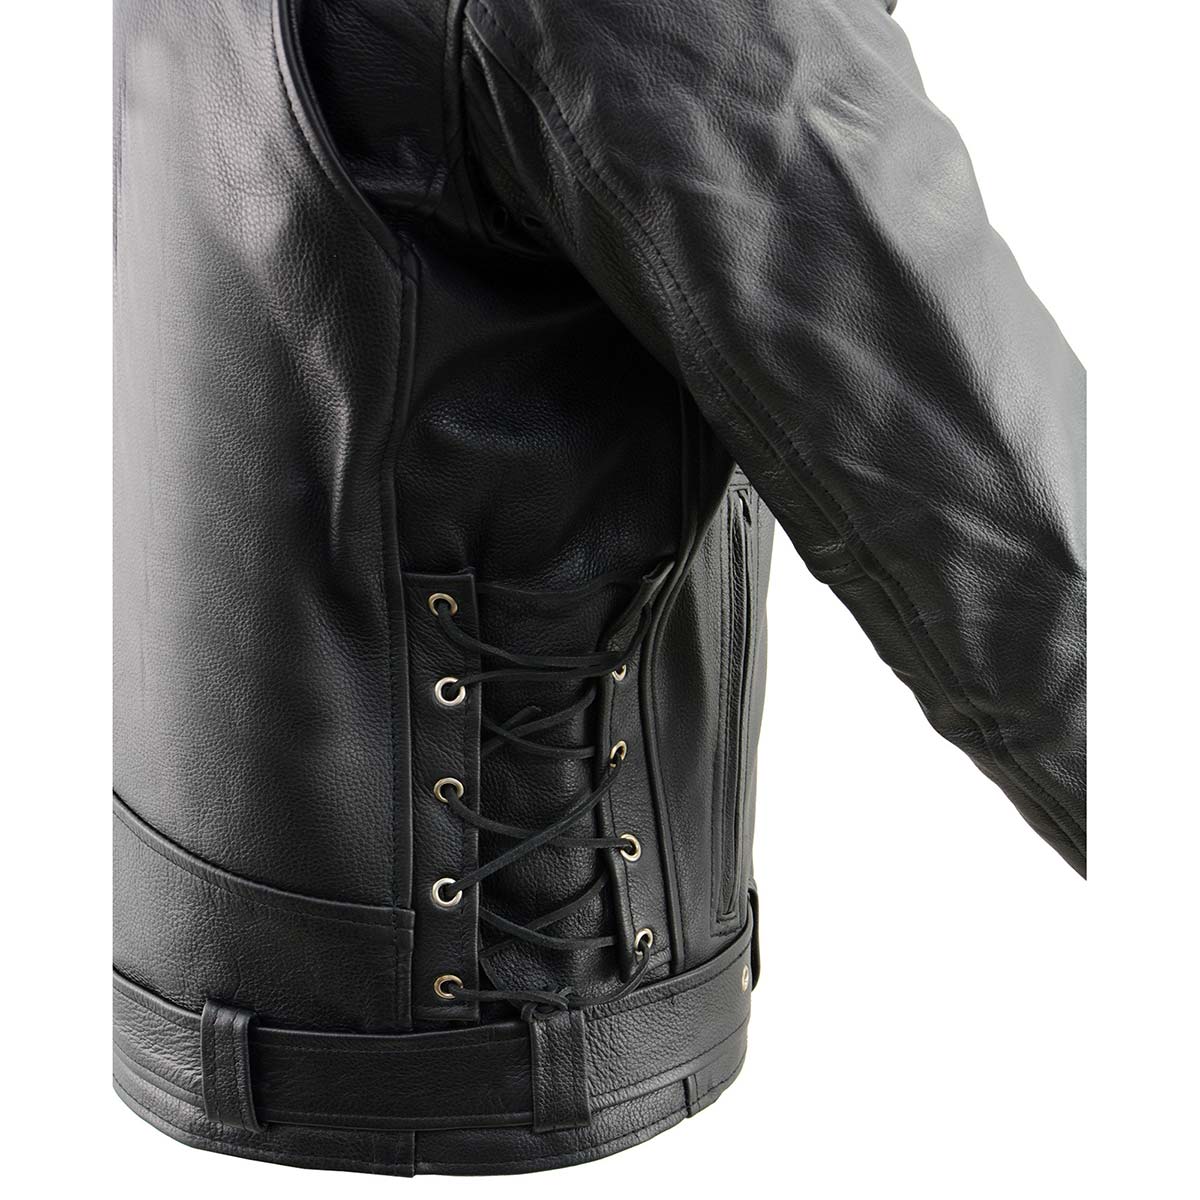 Black Leather Motorcycle Jacket for Men, Thick Brando Style Biker Jacket w/ Side Lace